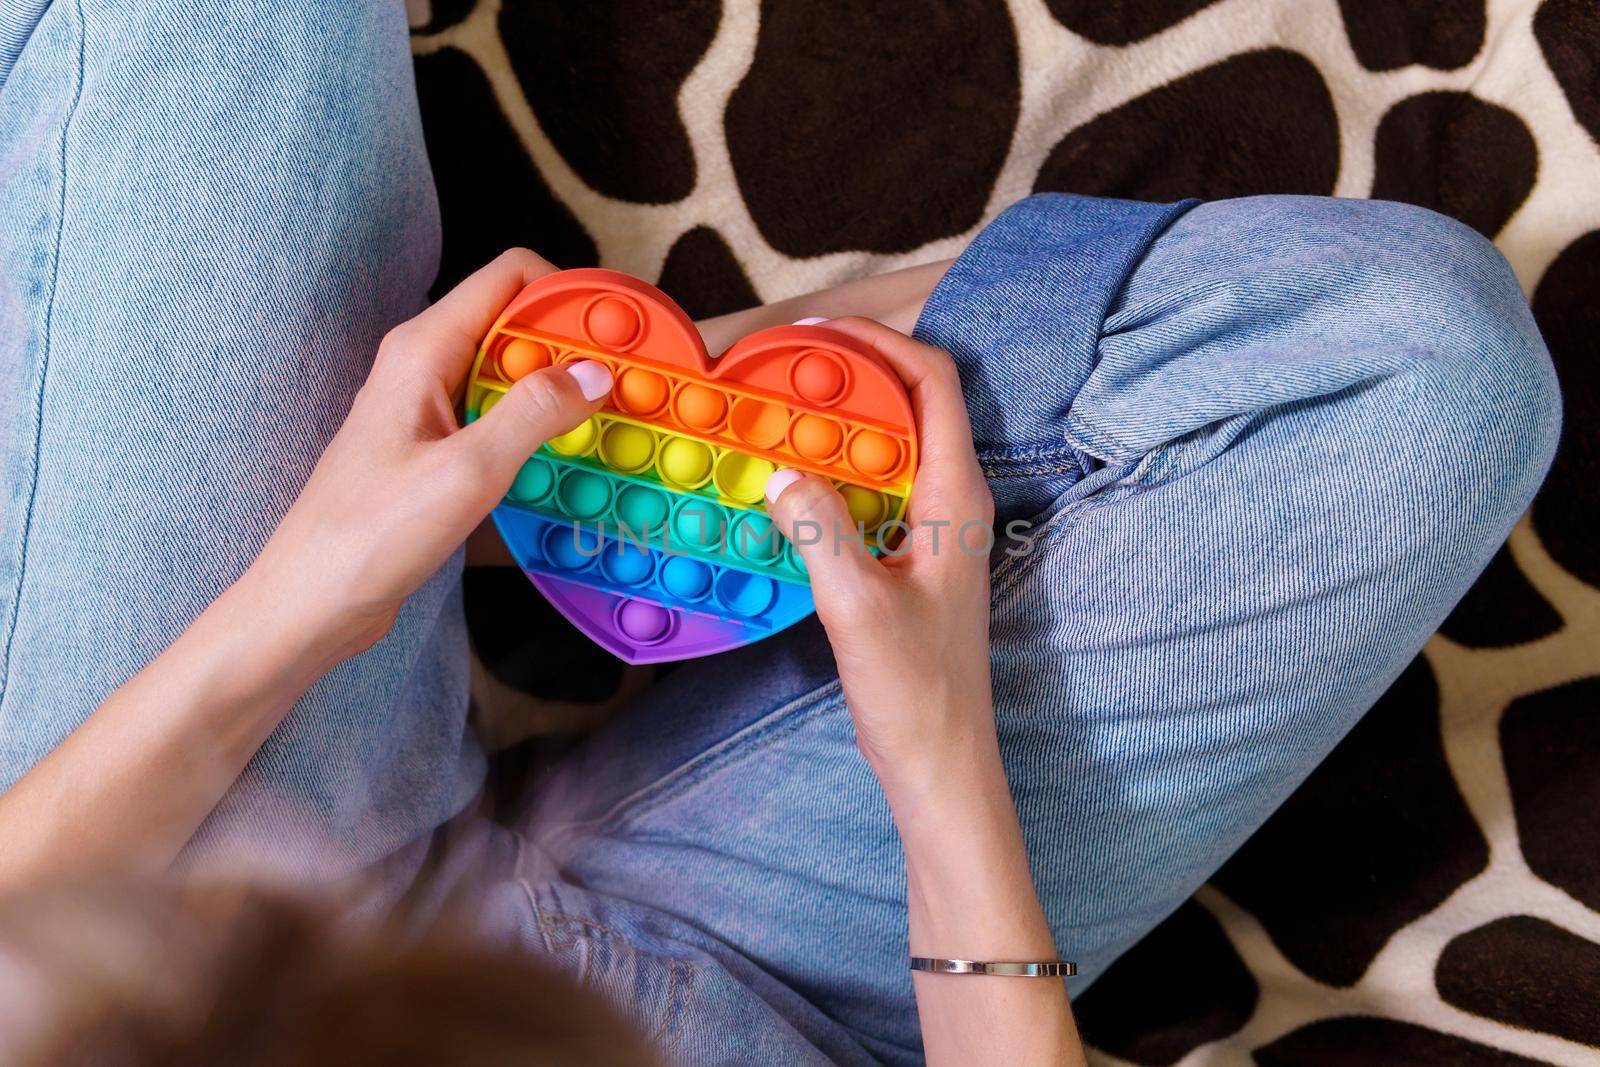 Girl plays with colorful rainbow pop it toy. Selective focus by darksoul72